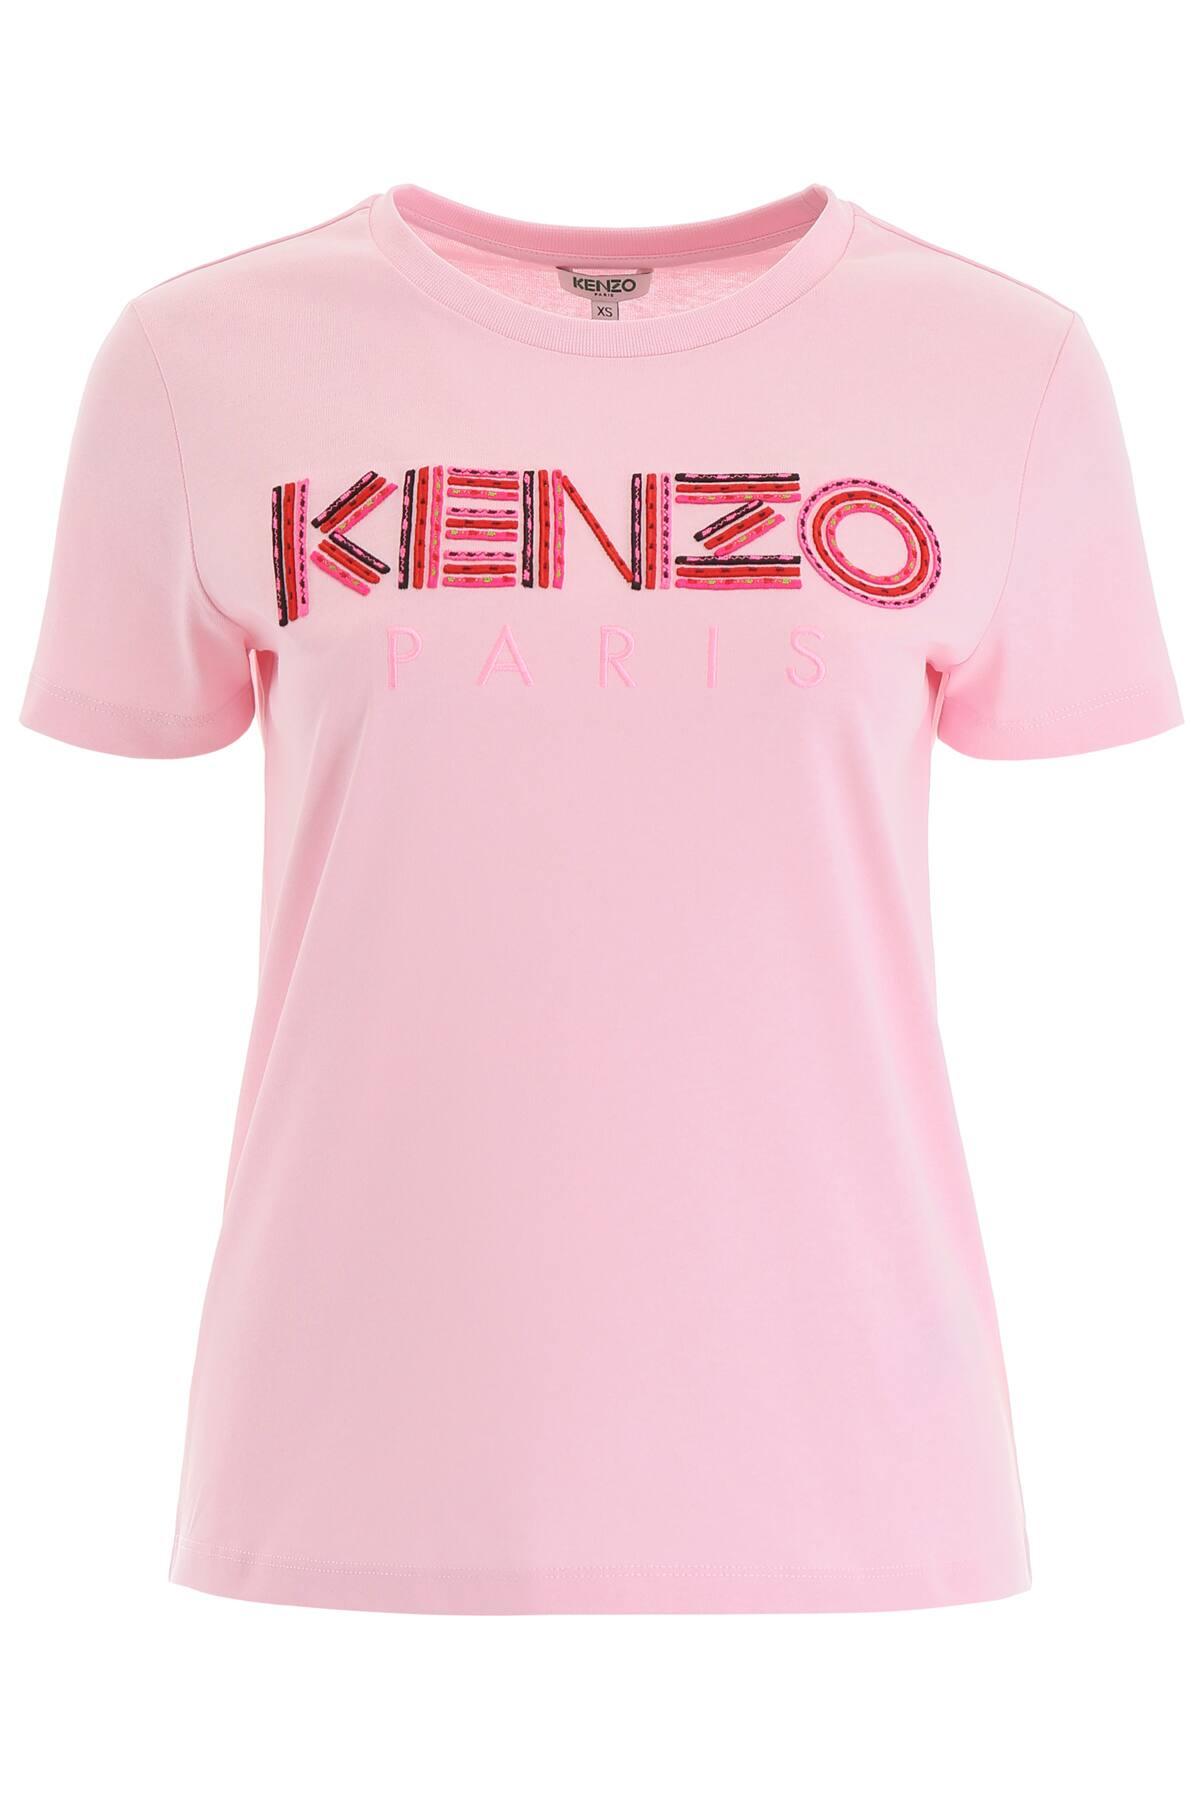 KENZO Cotton Logo Embroidered T-shirt in Pink - Save 10% - Lyst